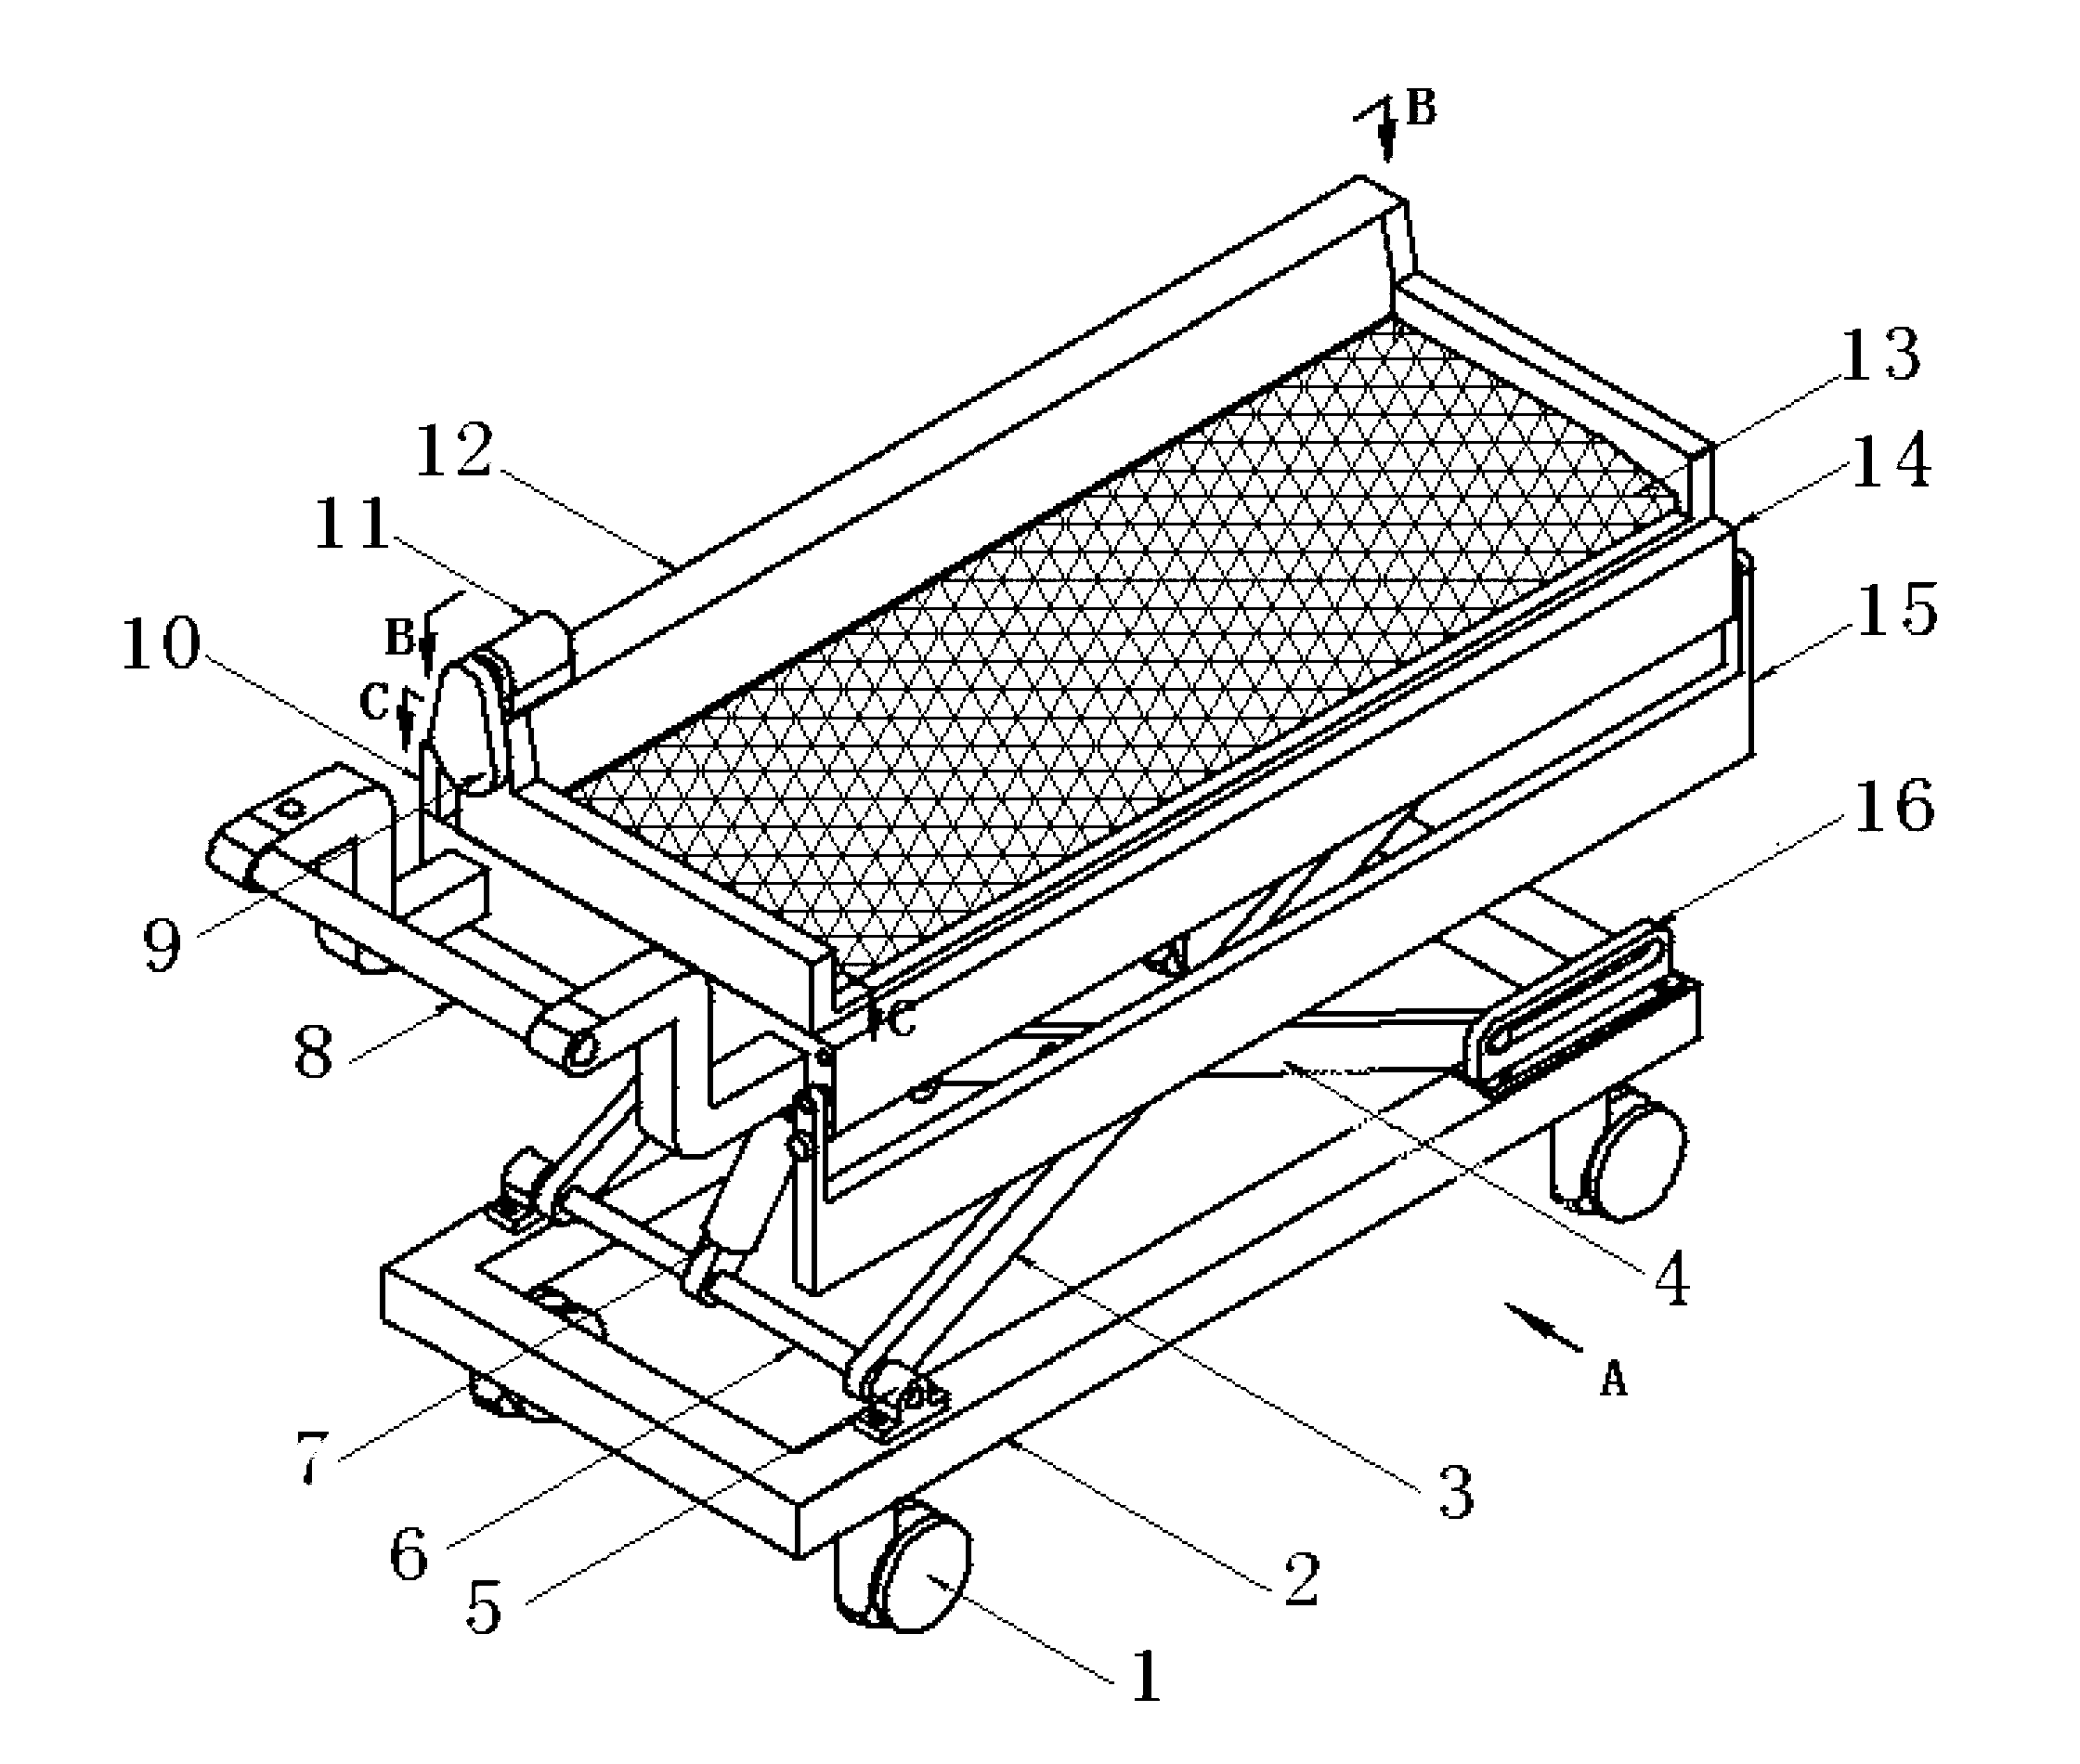 Stretcher vehicle capable of automatically and transversely moving patient